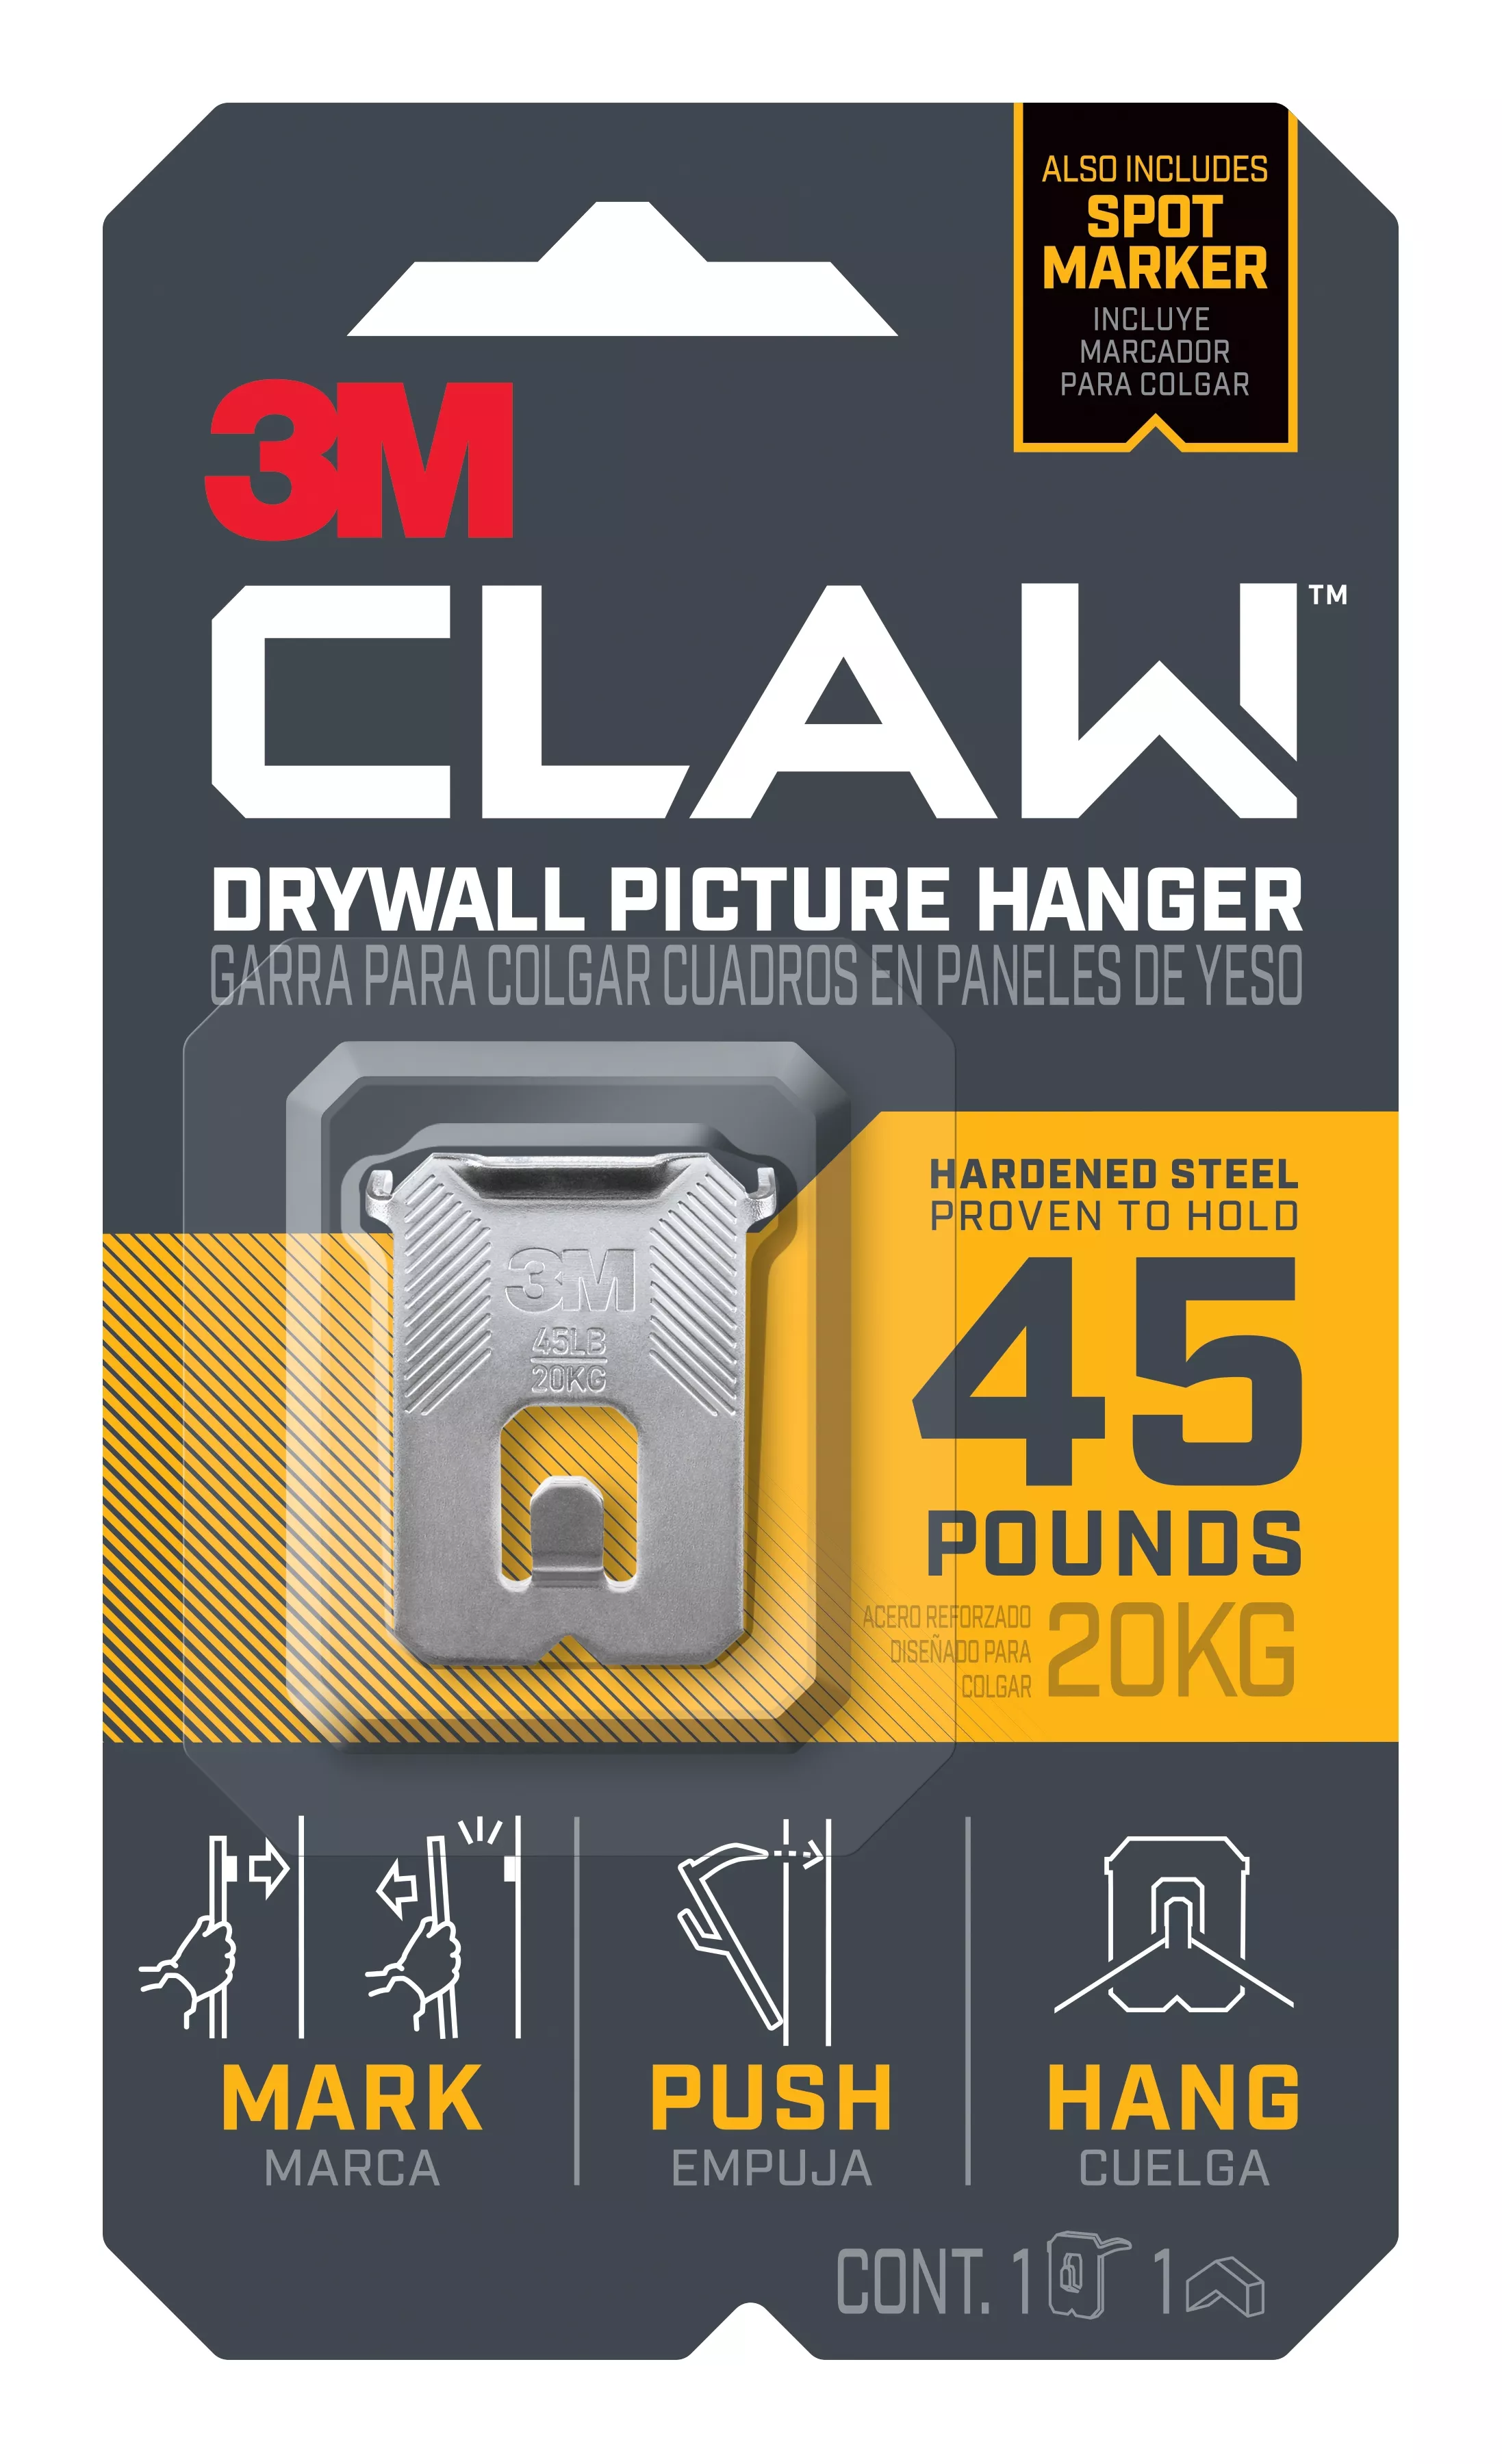 3M CLAW™ Drywall Picture Hanger 45 lb with Temporary Spot Marker 3PH45M-1EF, 1 hanger, 1 marker